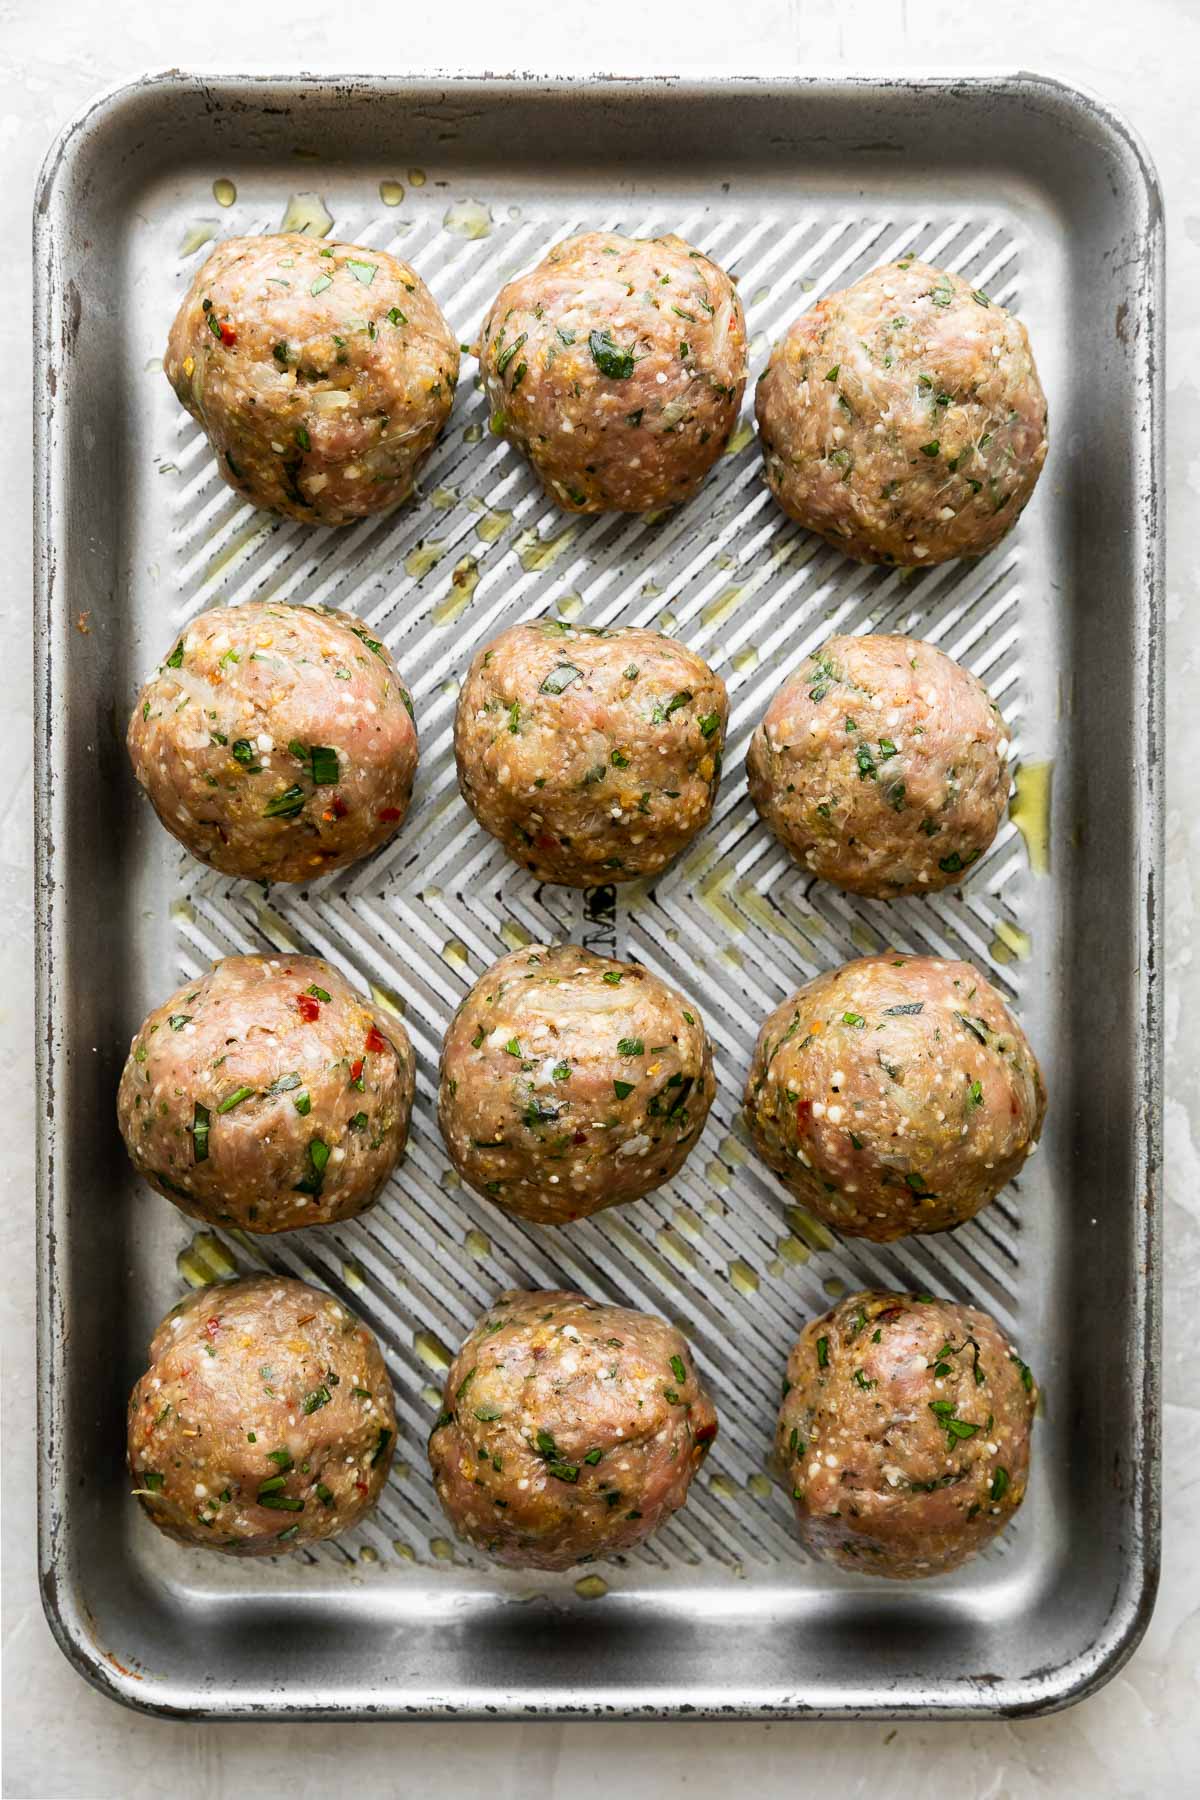 Twelve formed but uncooked Chicken parmesan meatballs are arranged in rows of three on a small aluminum baking sheet. The baking sheet sits atop a creamy white textured surface.